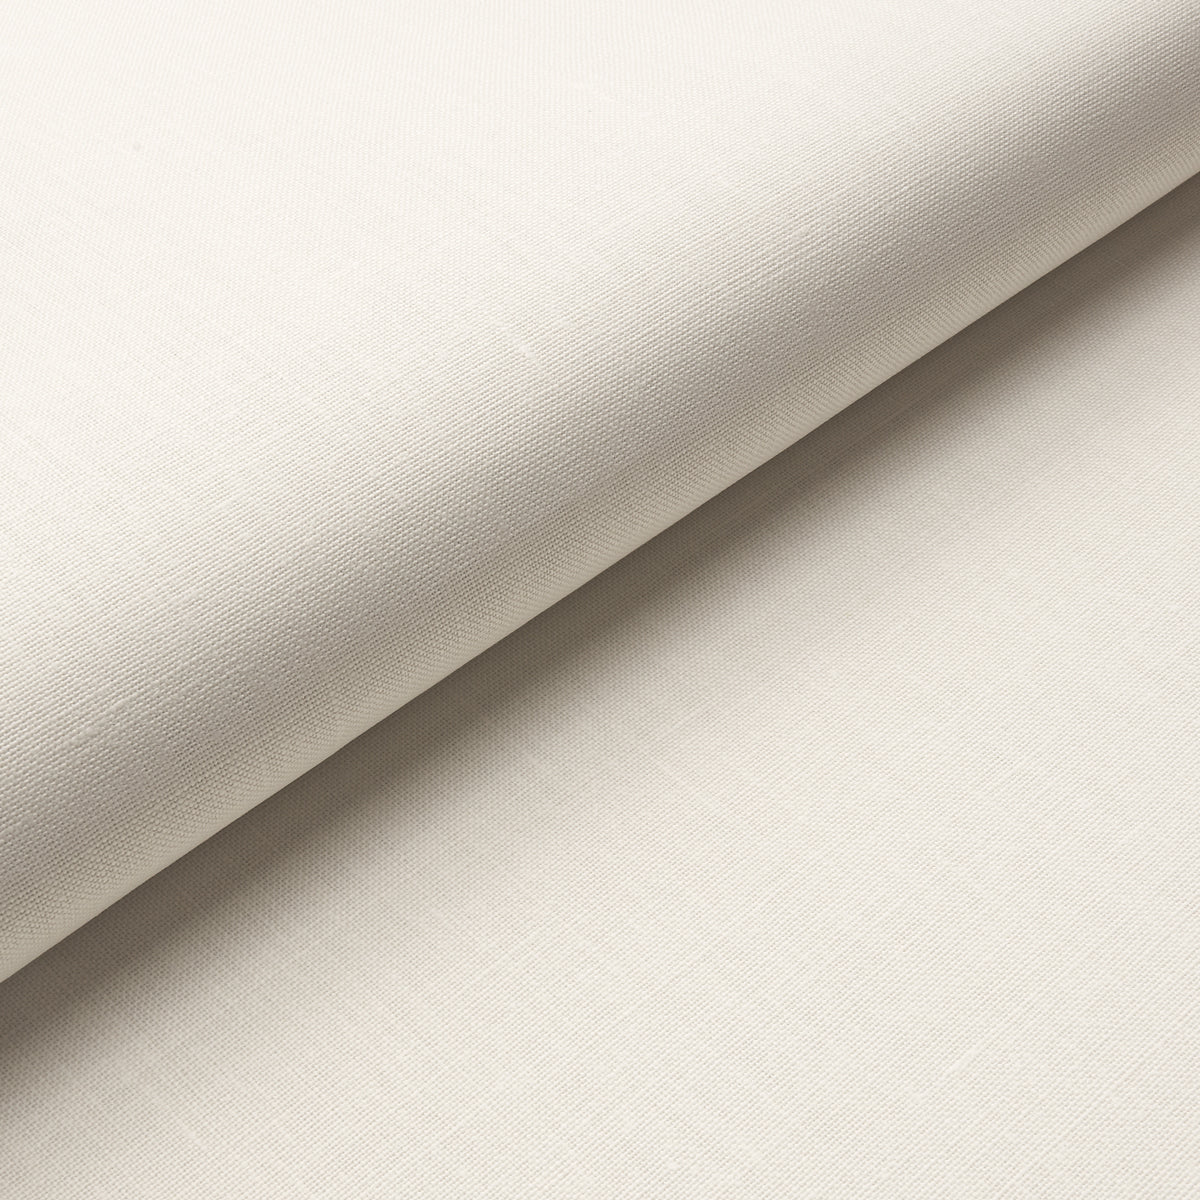 PERFORMANCE LINEN WALLCOVERING | IVORY